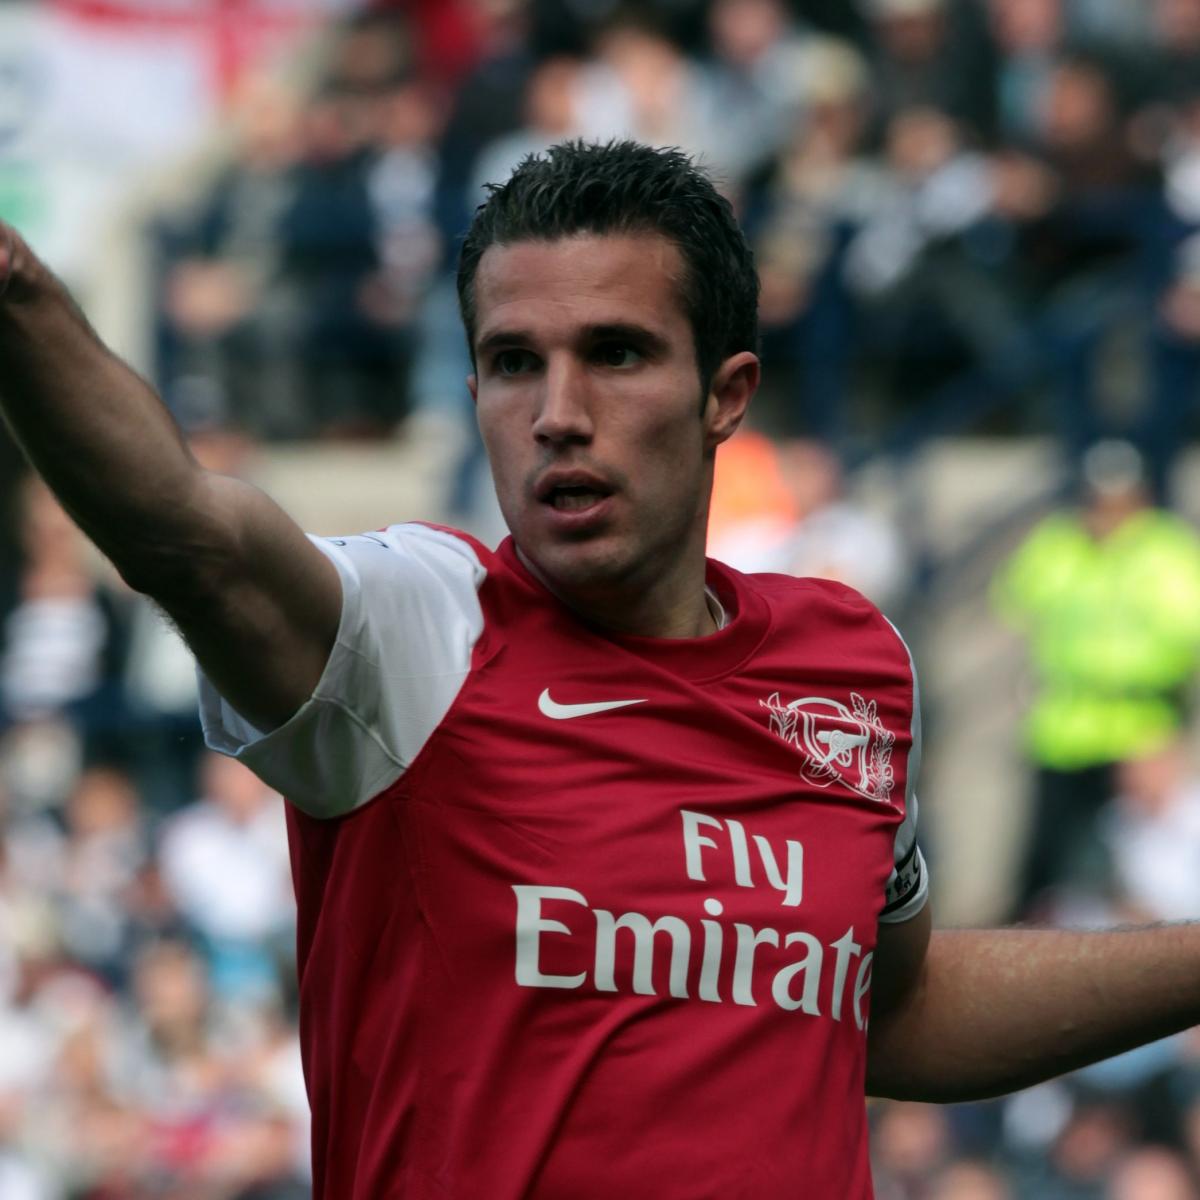 All Clubs Fail to Meet Arsenal's Valuation for RVP Just 4 Days Before ...